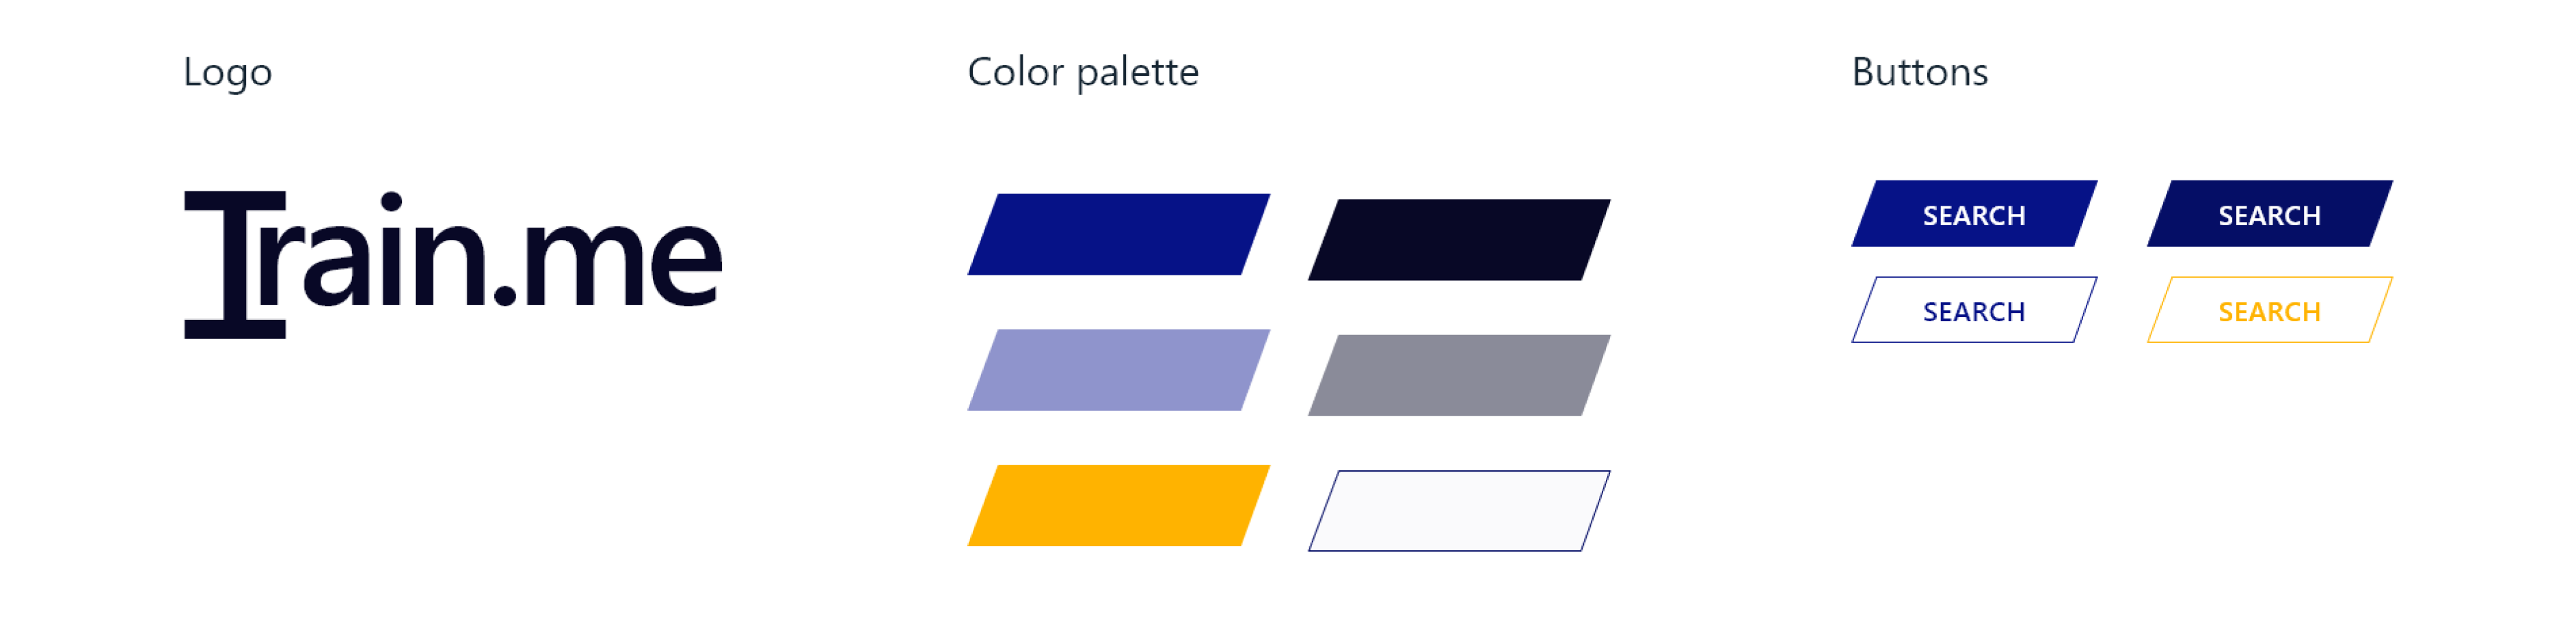 Color palette, logo and buttons